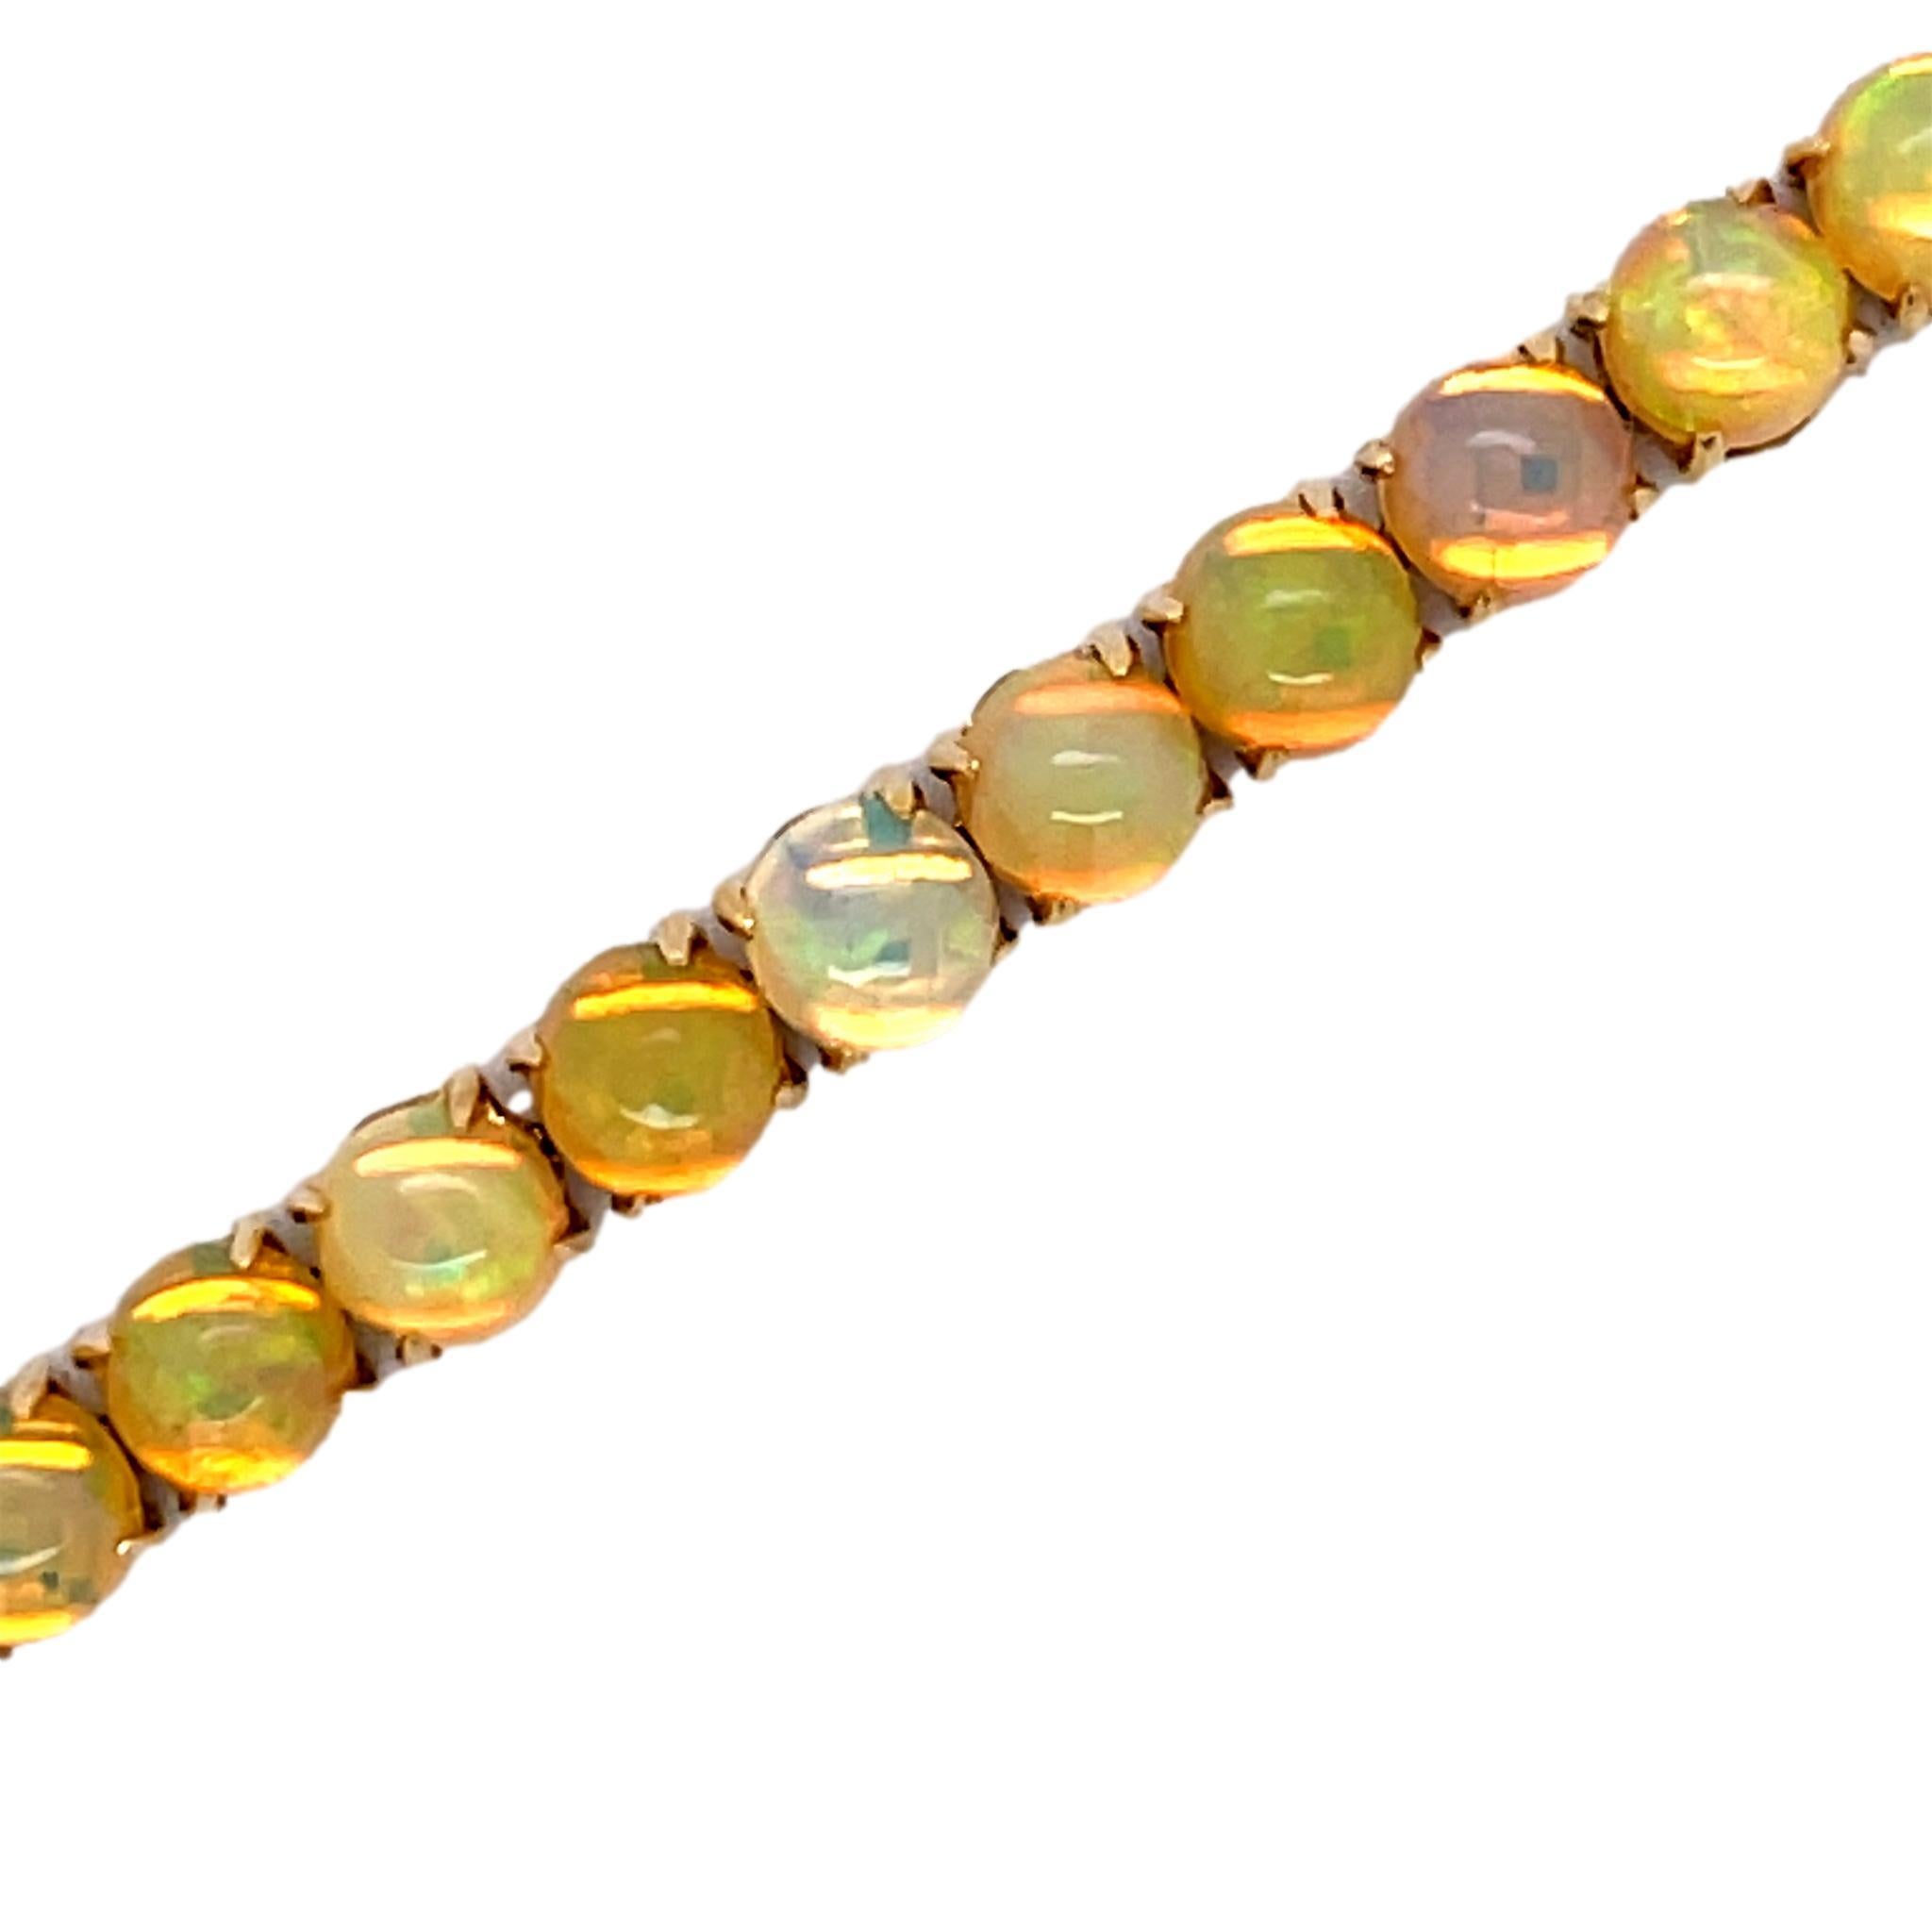 This stunning bracelet has 35 vibrant Ethiopian Opals each set with 4 prongs.  Fun to wear everyday or on that special occasion. There is a double lock for extra security. This bracelet comes with detailed tags attached and is shipped in a beautiful